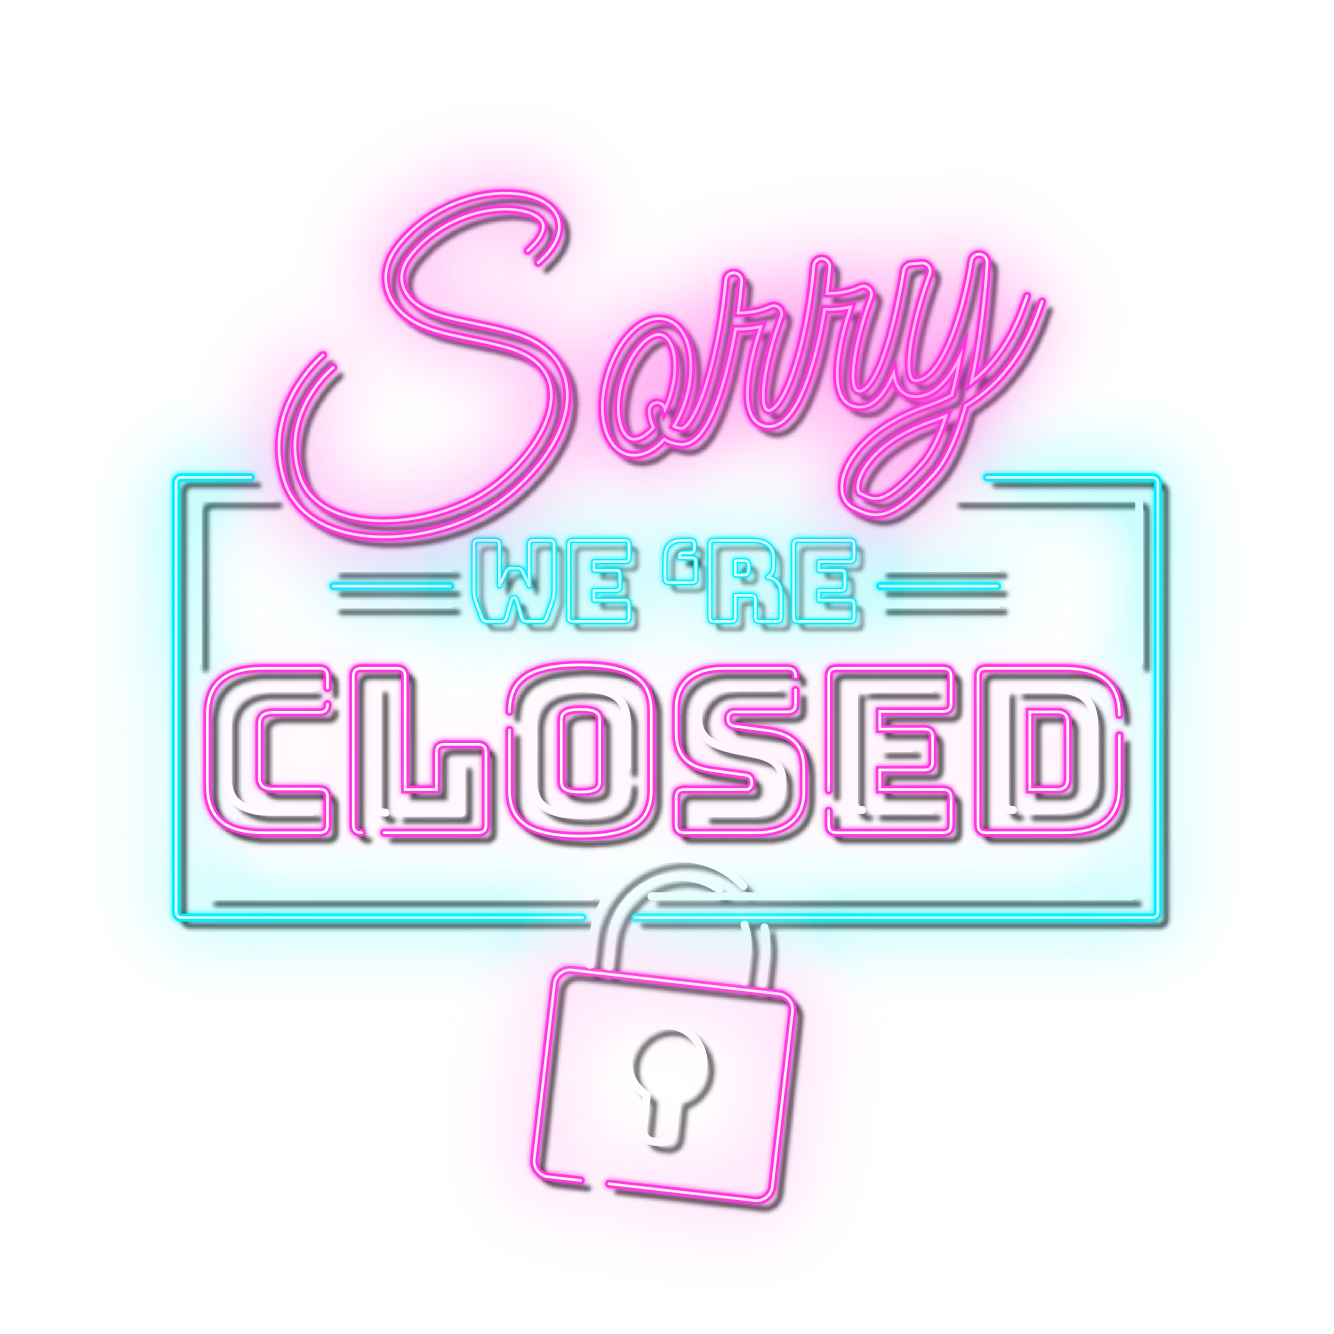 Neon styled text saying "Sorry, we are closed"